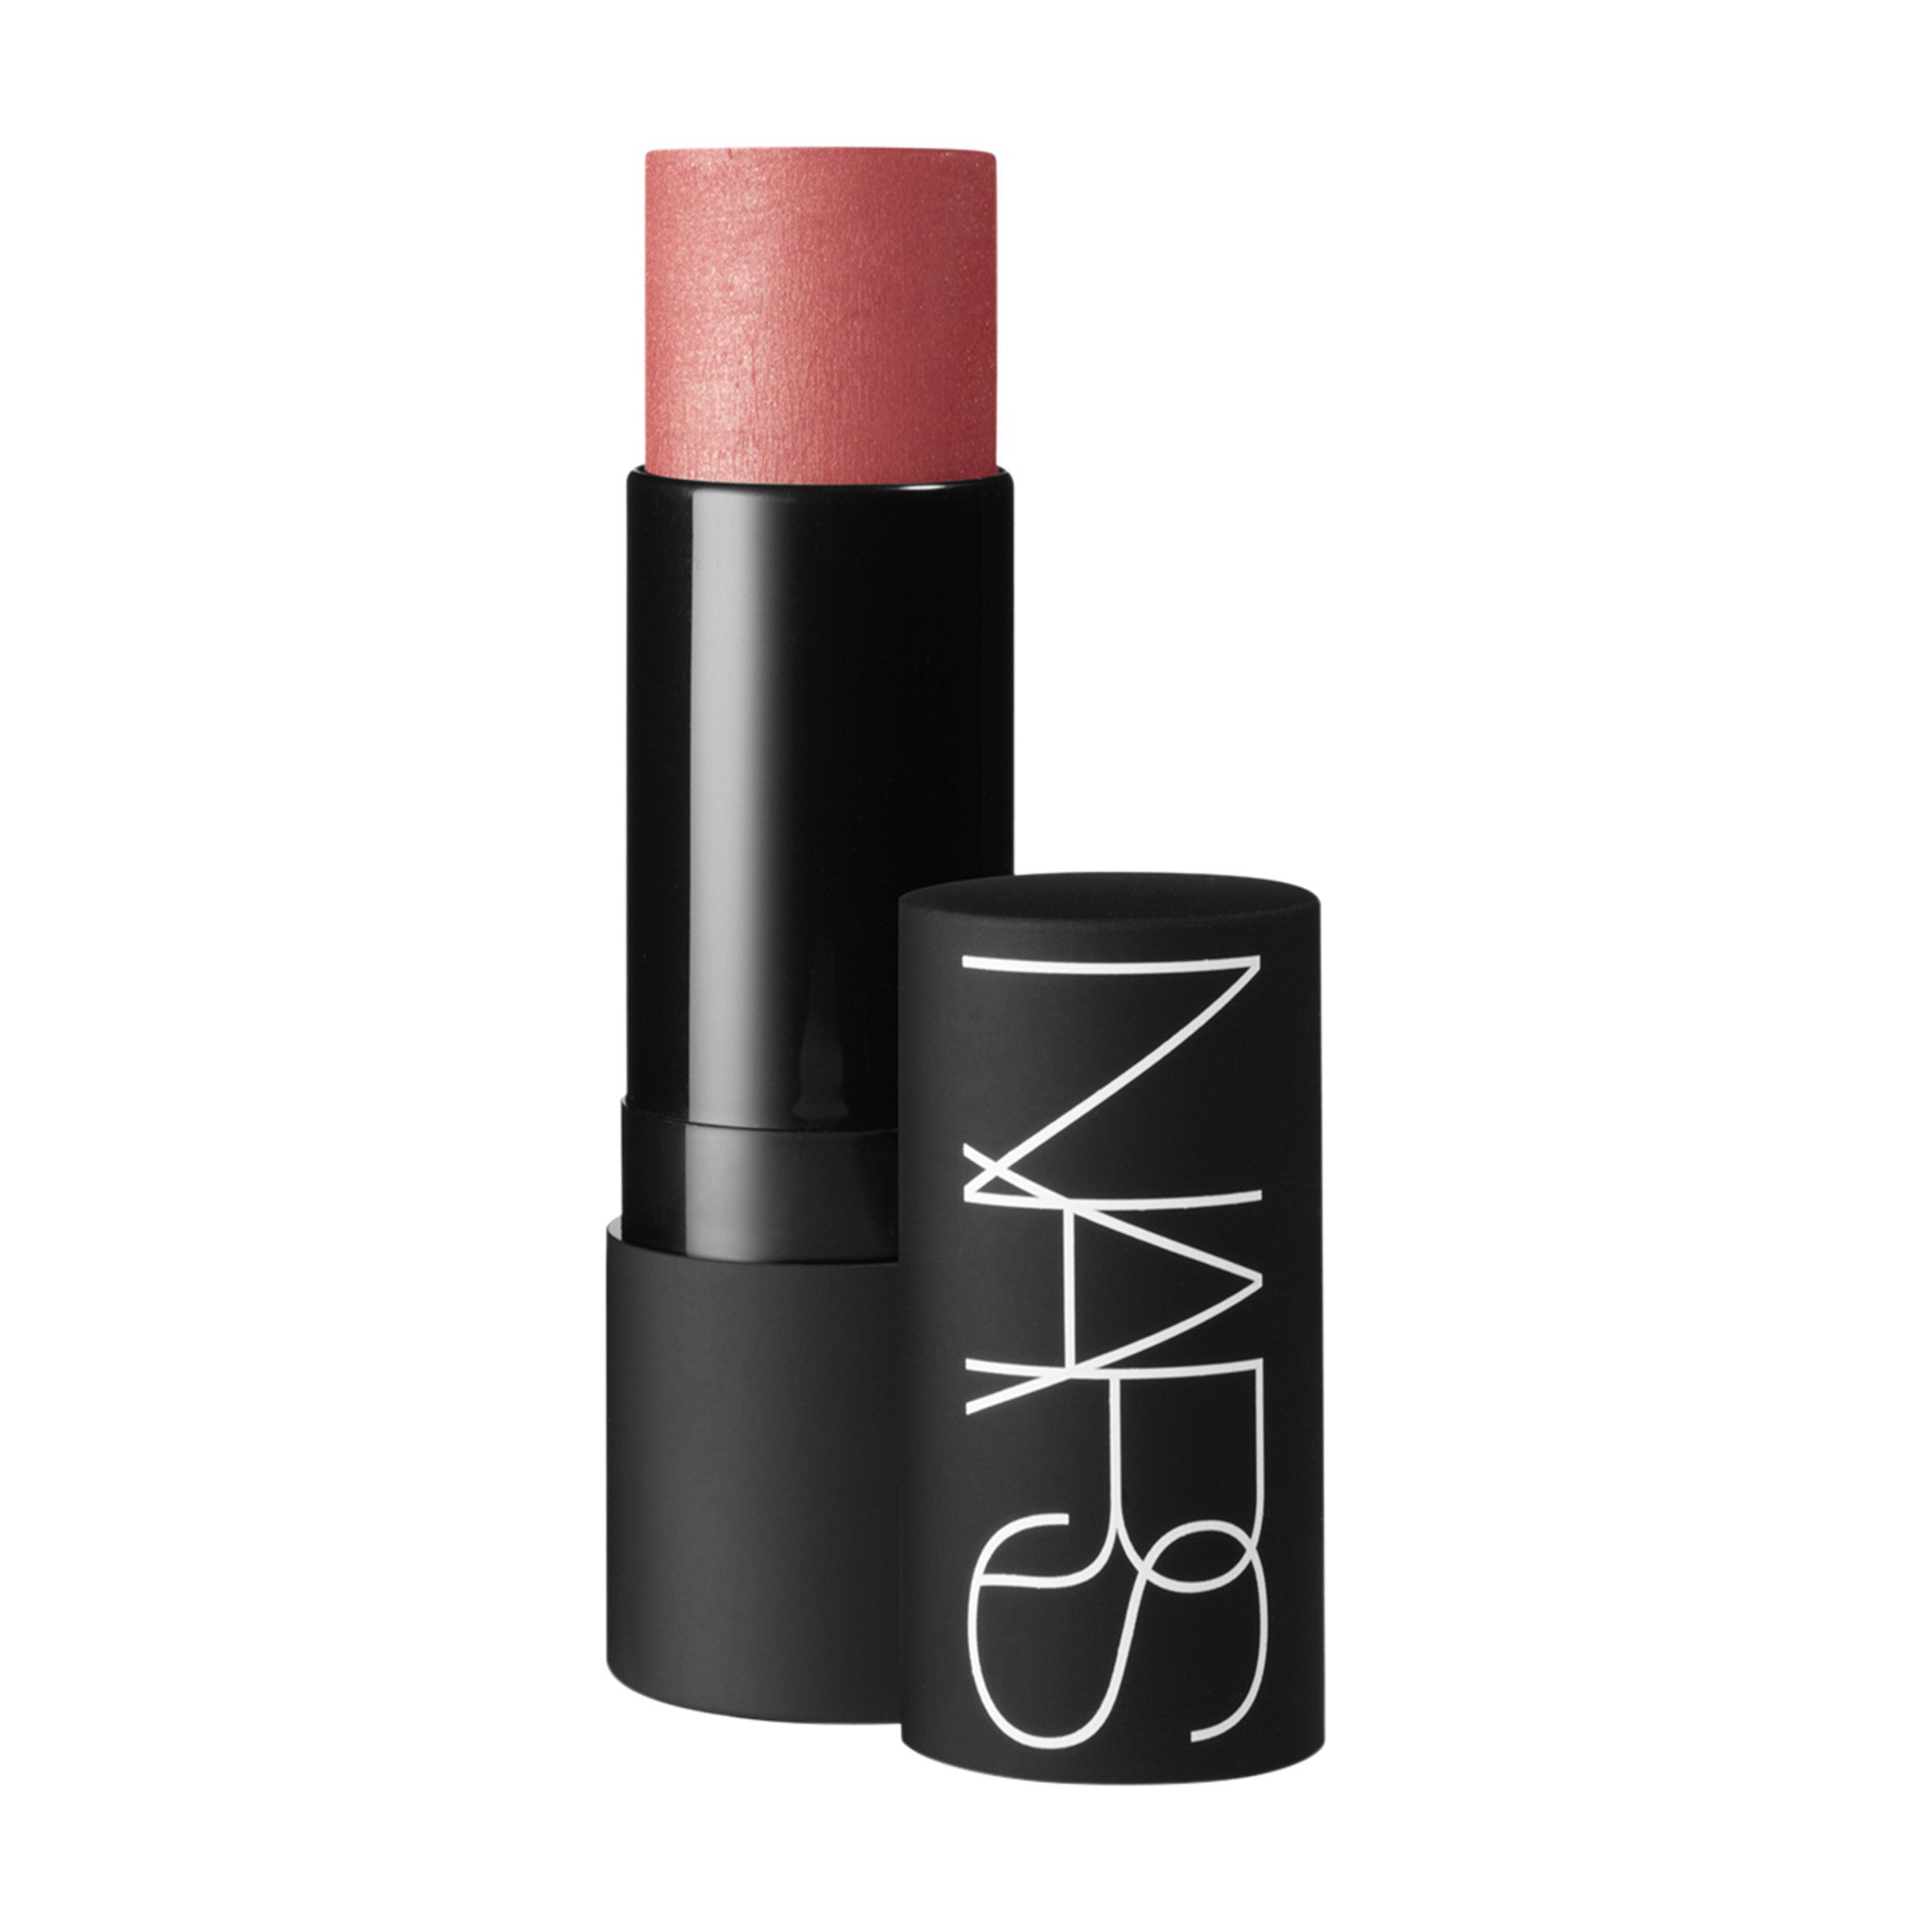 Nars The Multiple (Limited Edition) Color/Shade variant: Maui main image. This product is in the color coral